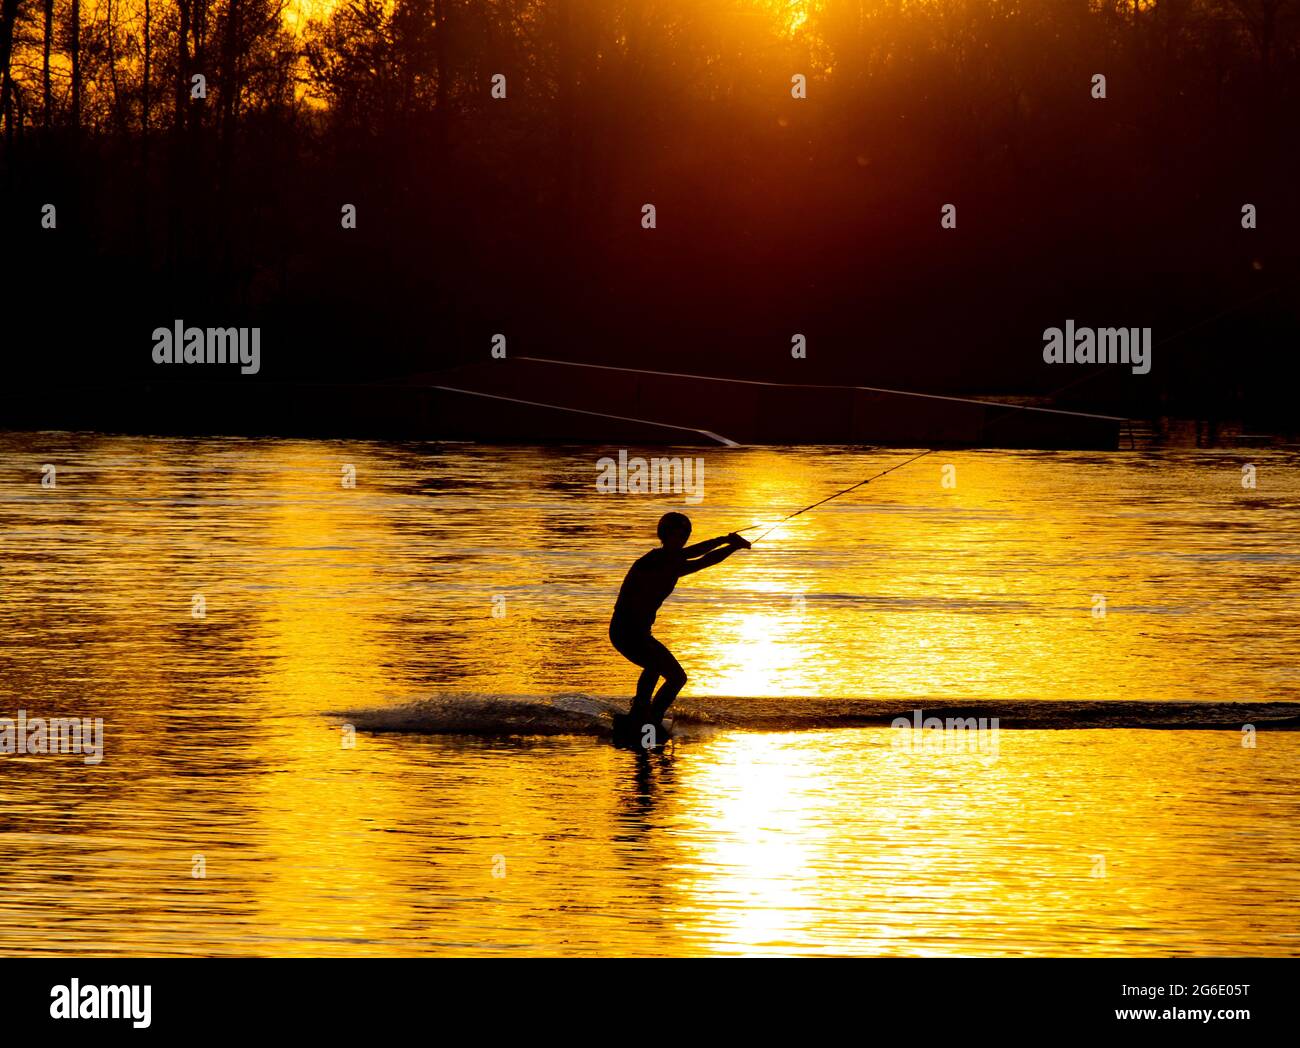 Silhouette of an athlete riding a water ski at sunset Stock Photo